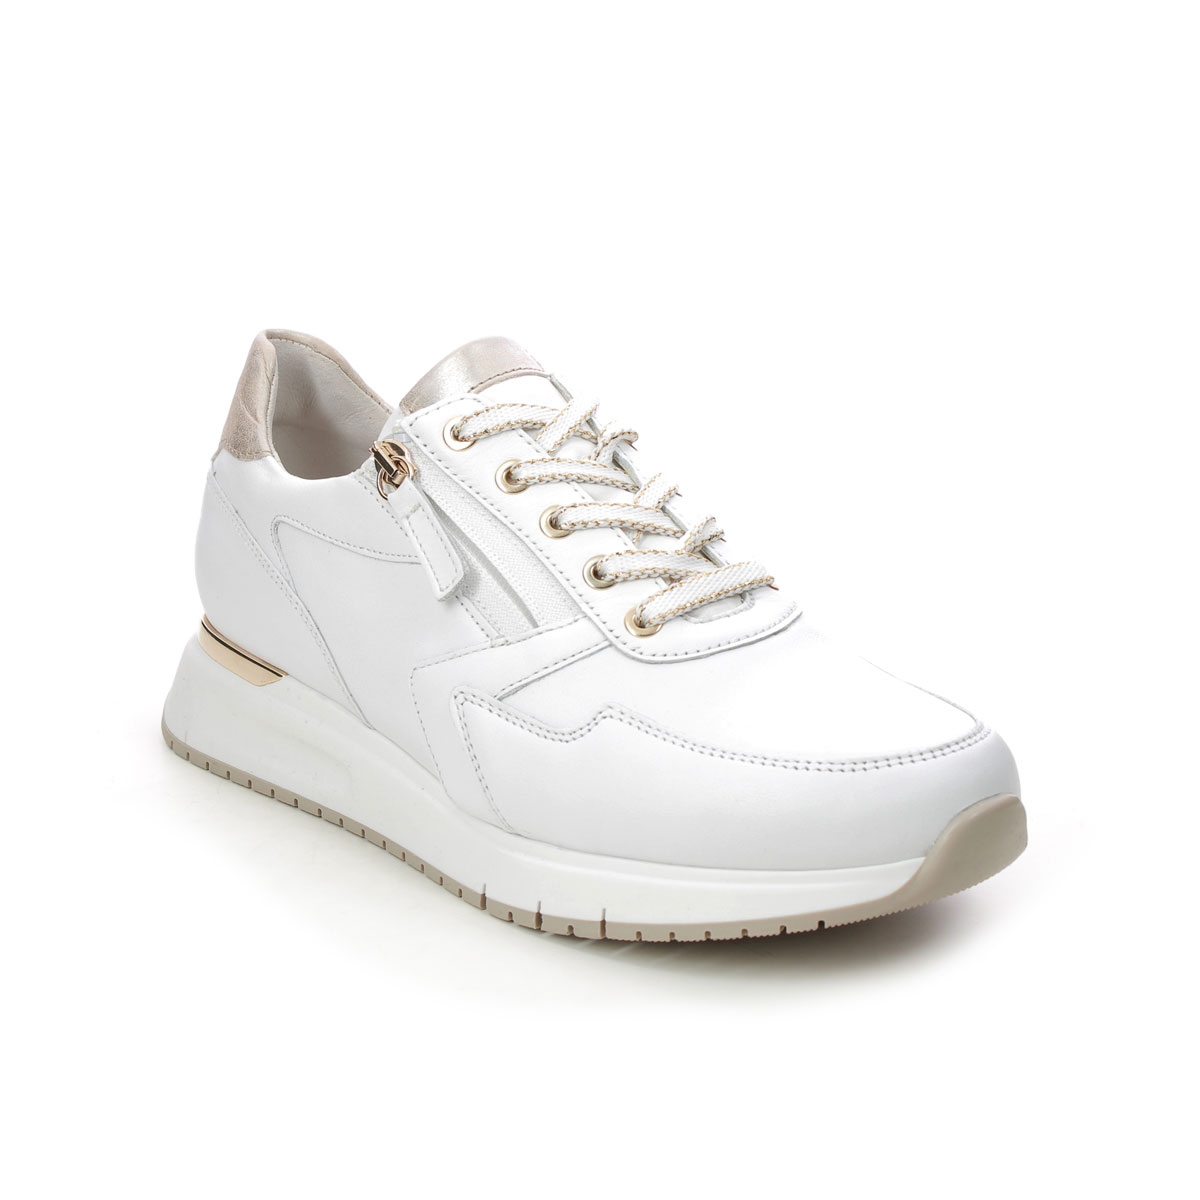 Gabor Princess White Gold Womens trainers 26.448.51 in a Plain Leather in Size 4